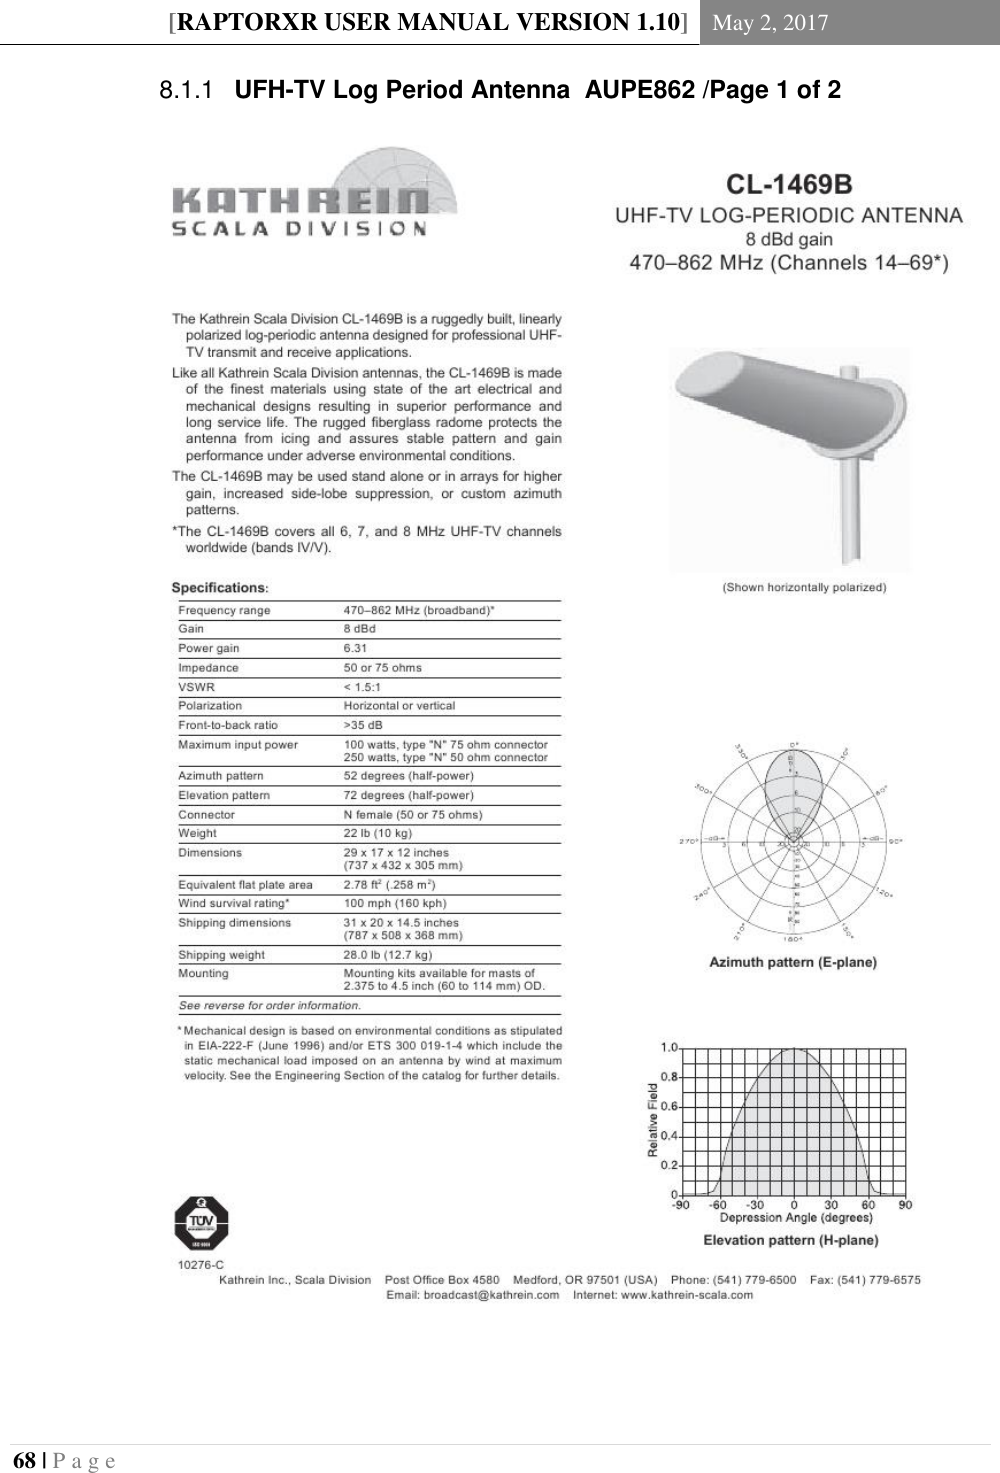 [RAPTORXR USER MANUAL VERSION 1.10] May 2, 2017  68 | P a g e    UFH-TV Log Period Antenna  AUPE862 /Page 1 of 28.1.1